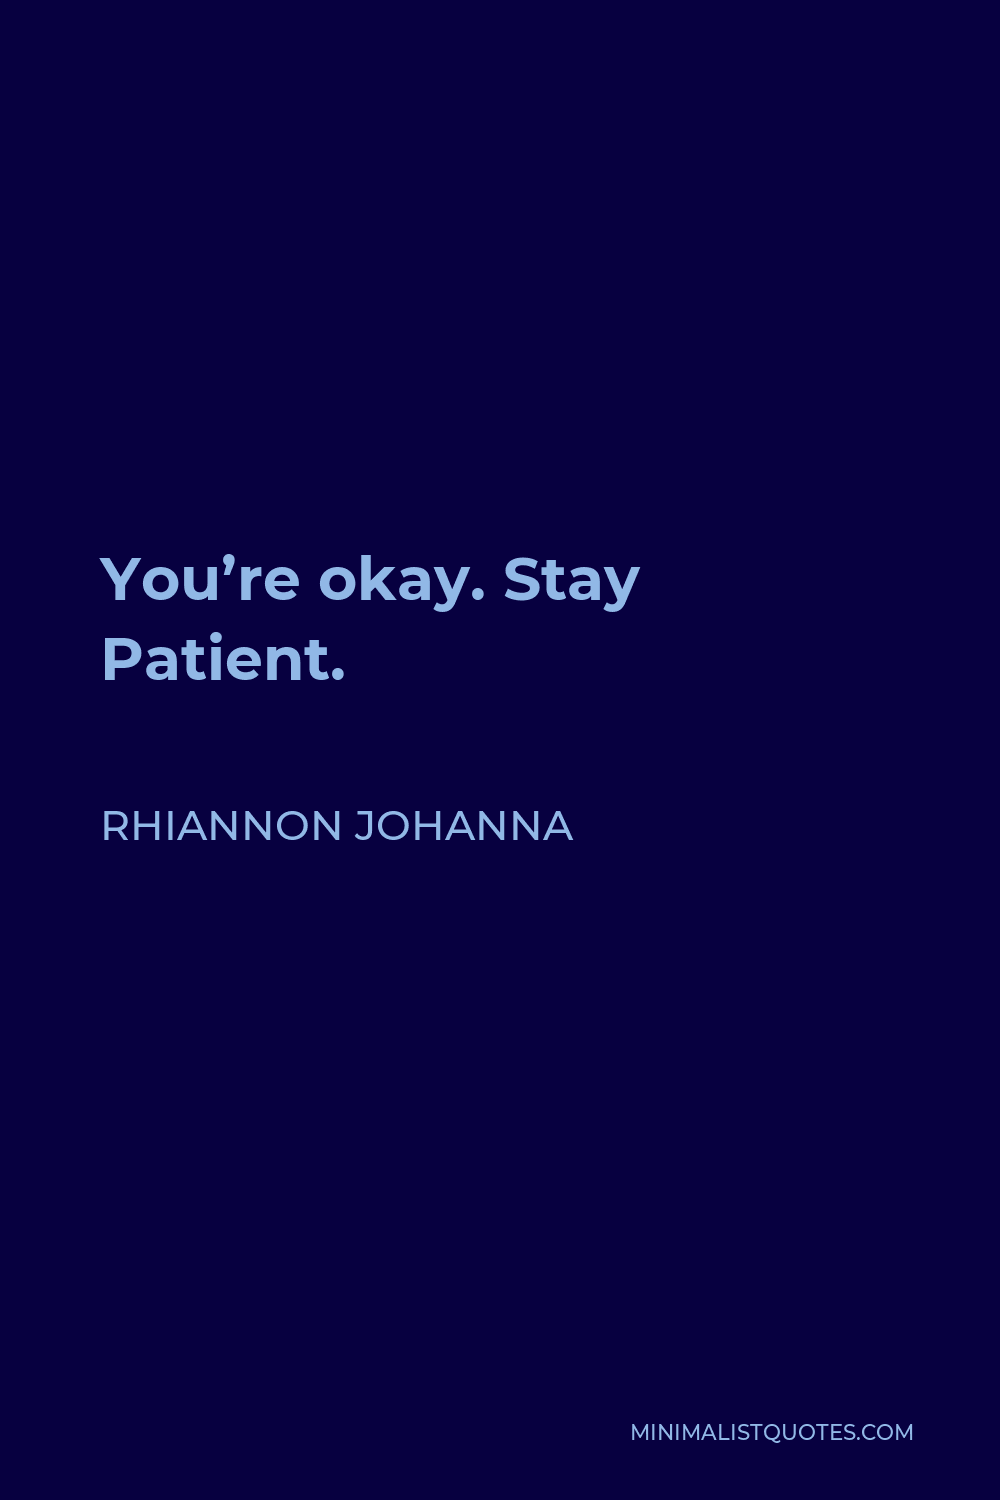 Rhiannon Johanna Quote - You’re okay. Stay Patient.